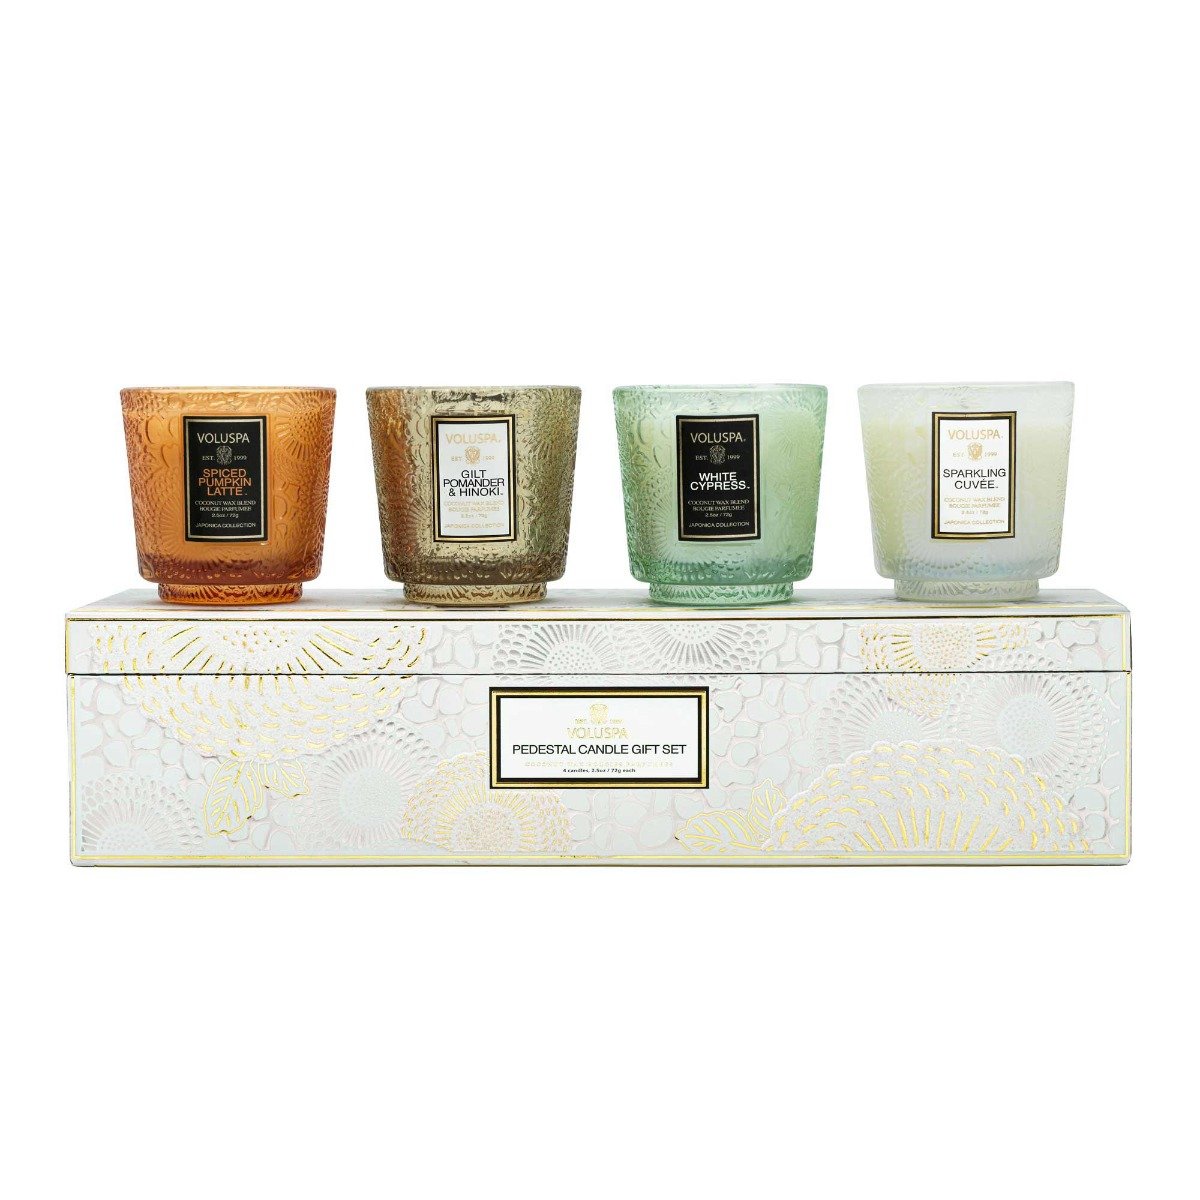  Holiday White Pedestal Candle Gift Set 